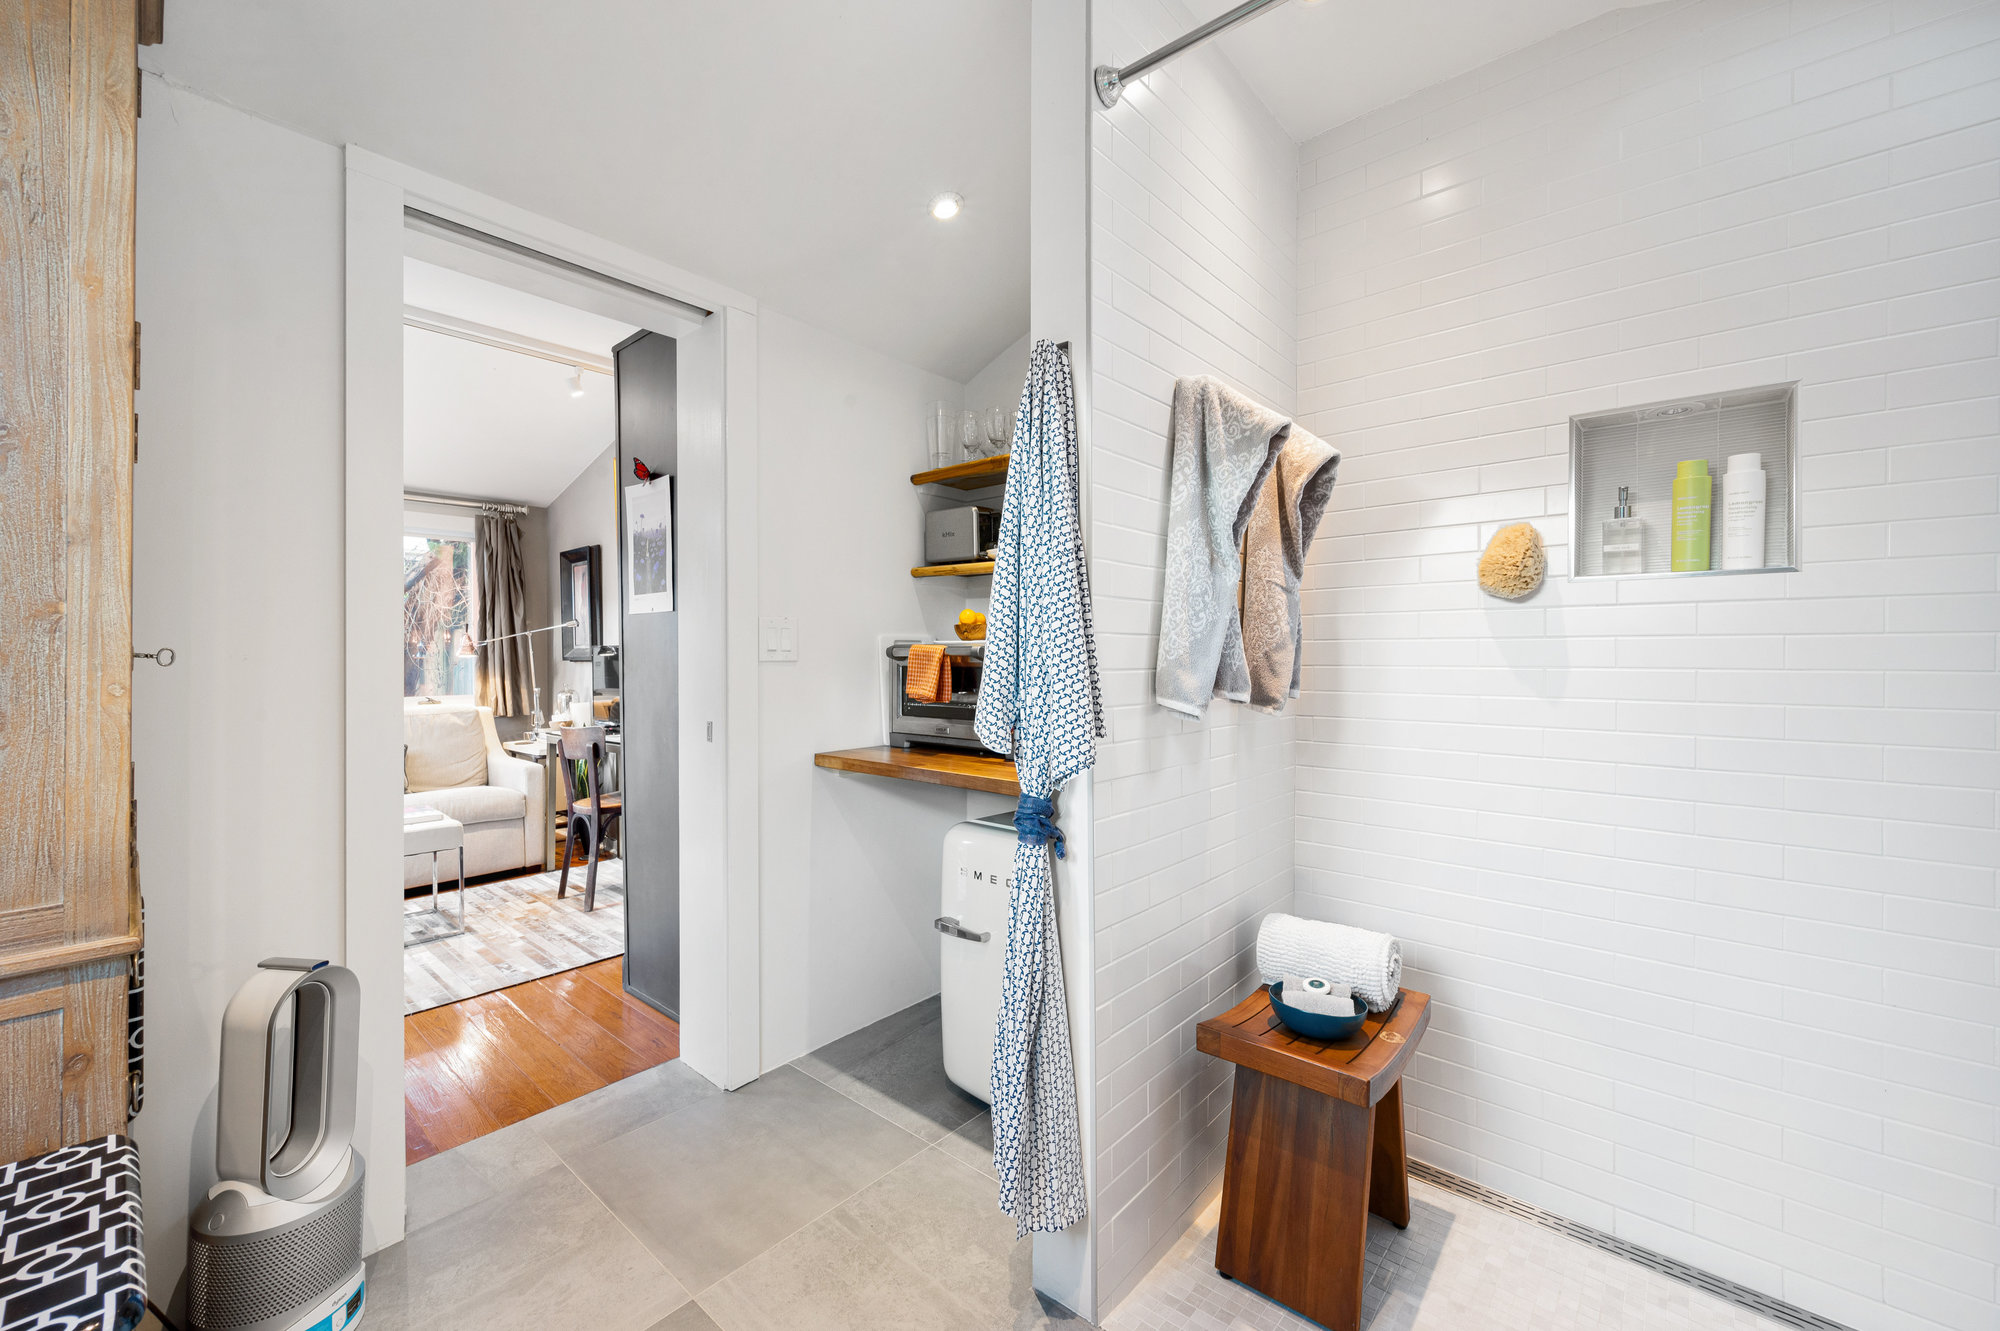 Property Photo: Bathroom has stand up shower. 